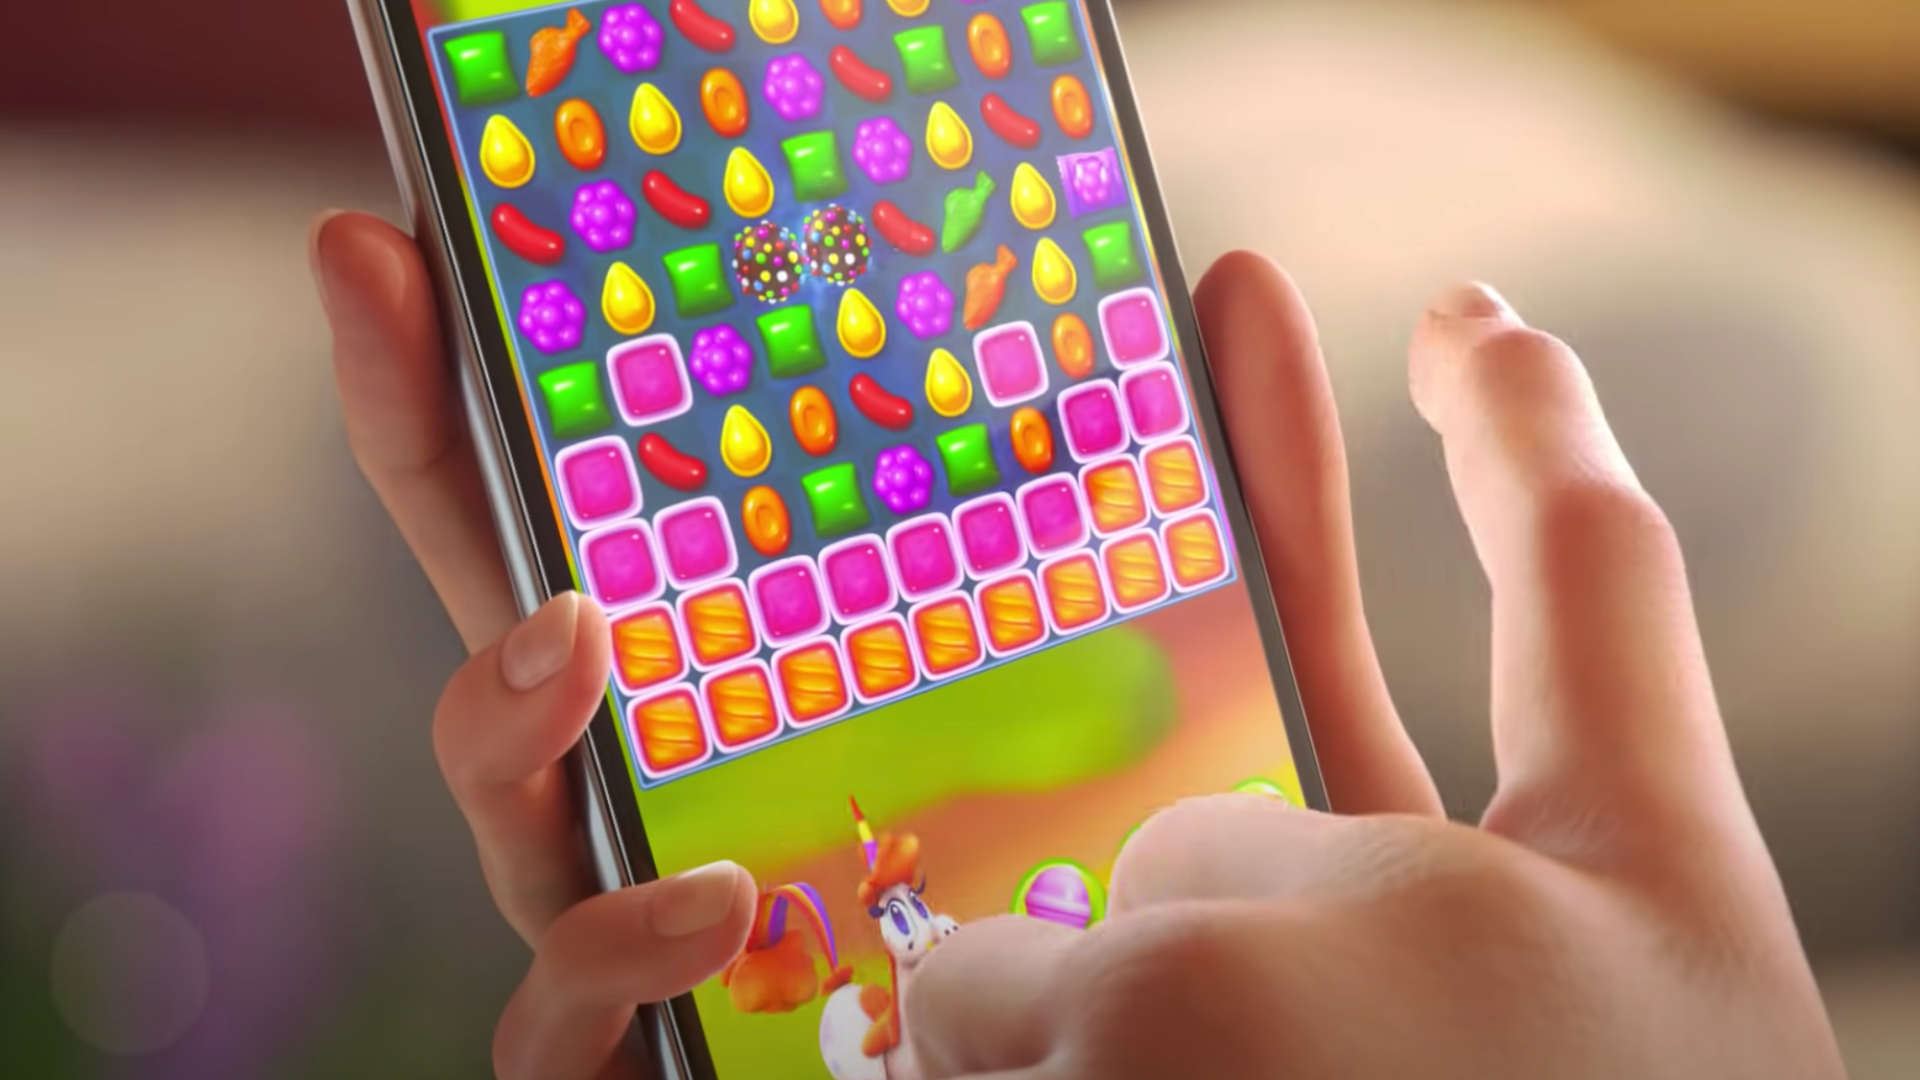 Candy Crush Saga for AndroidDownload, Guide, Tips, Tricks